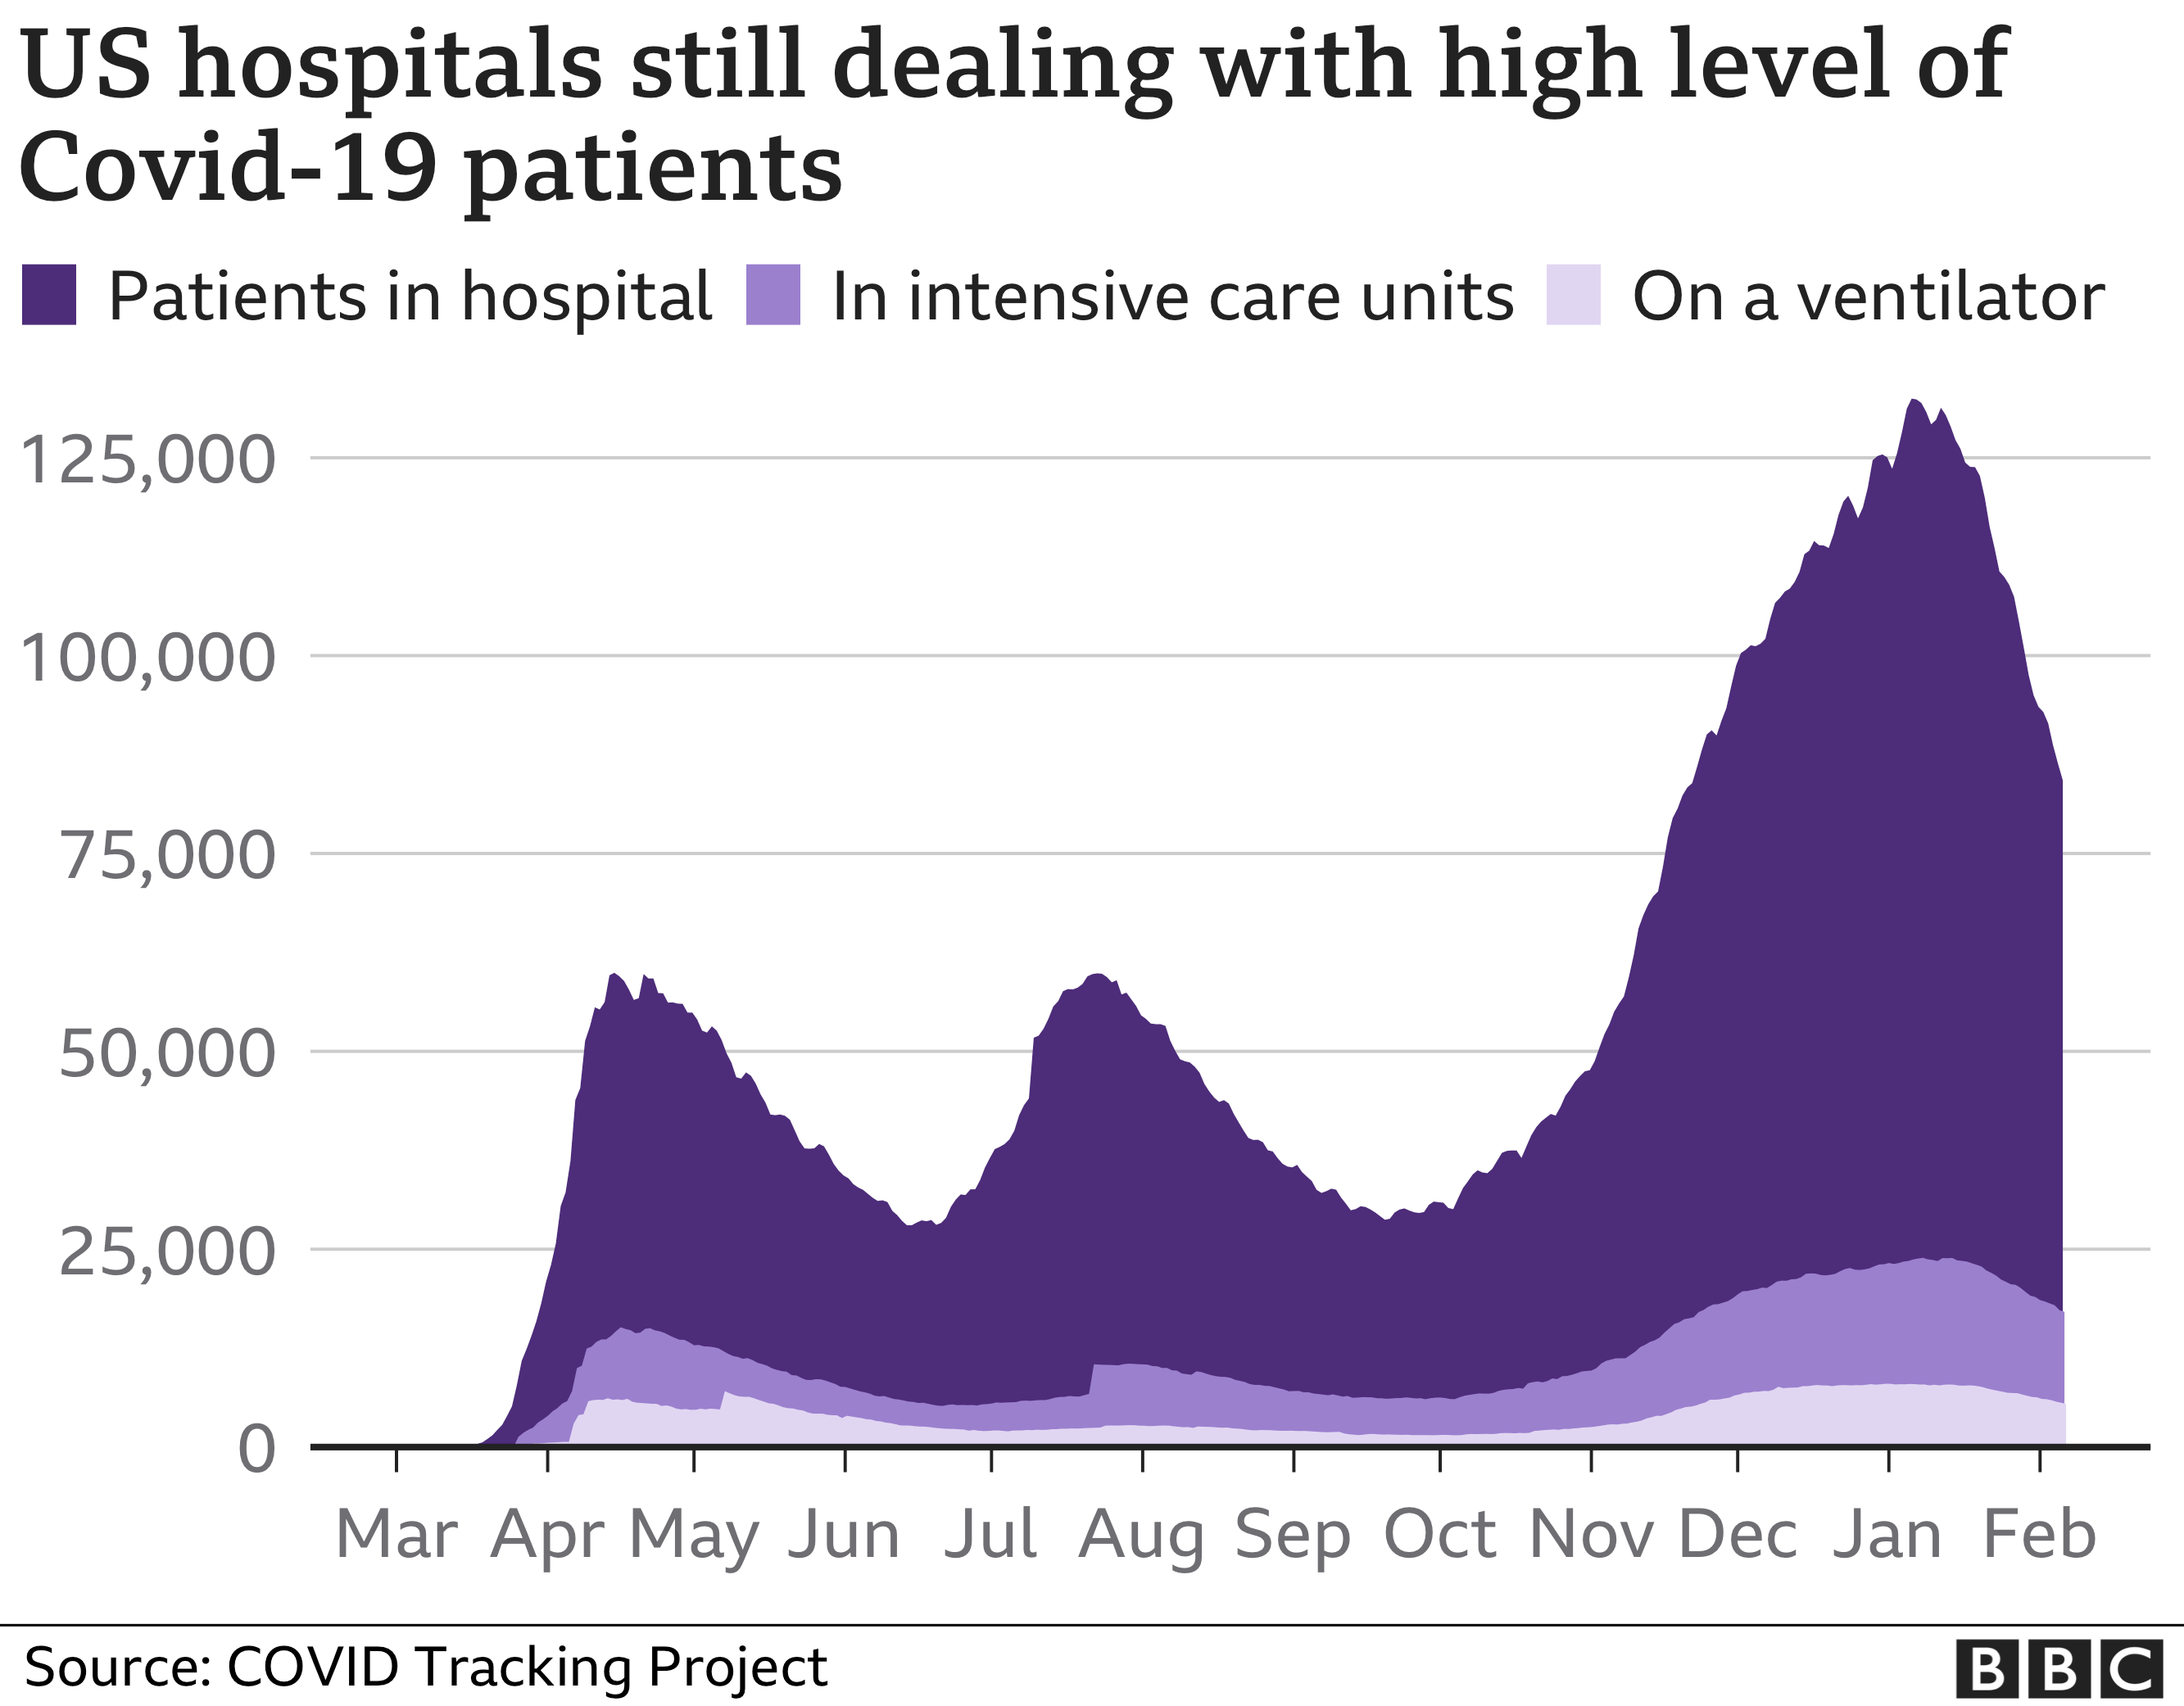 Chart showing the number of Covid-19 patients in hospitals in the US remains very high